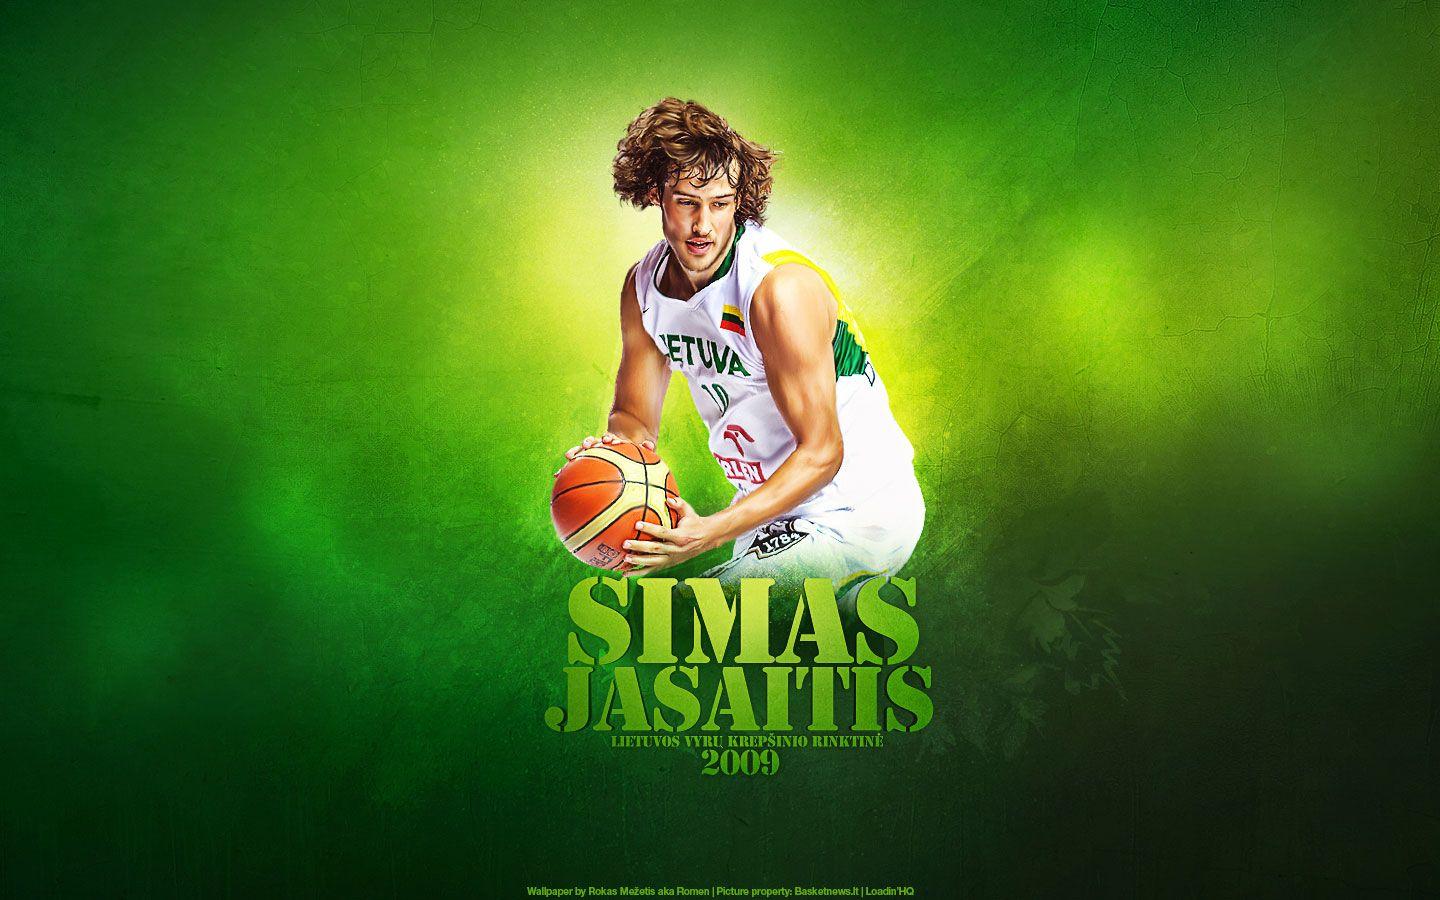 Lithuania Basketball Wallpaper, Pictures, Wallpapers